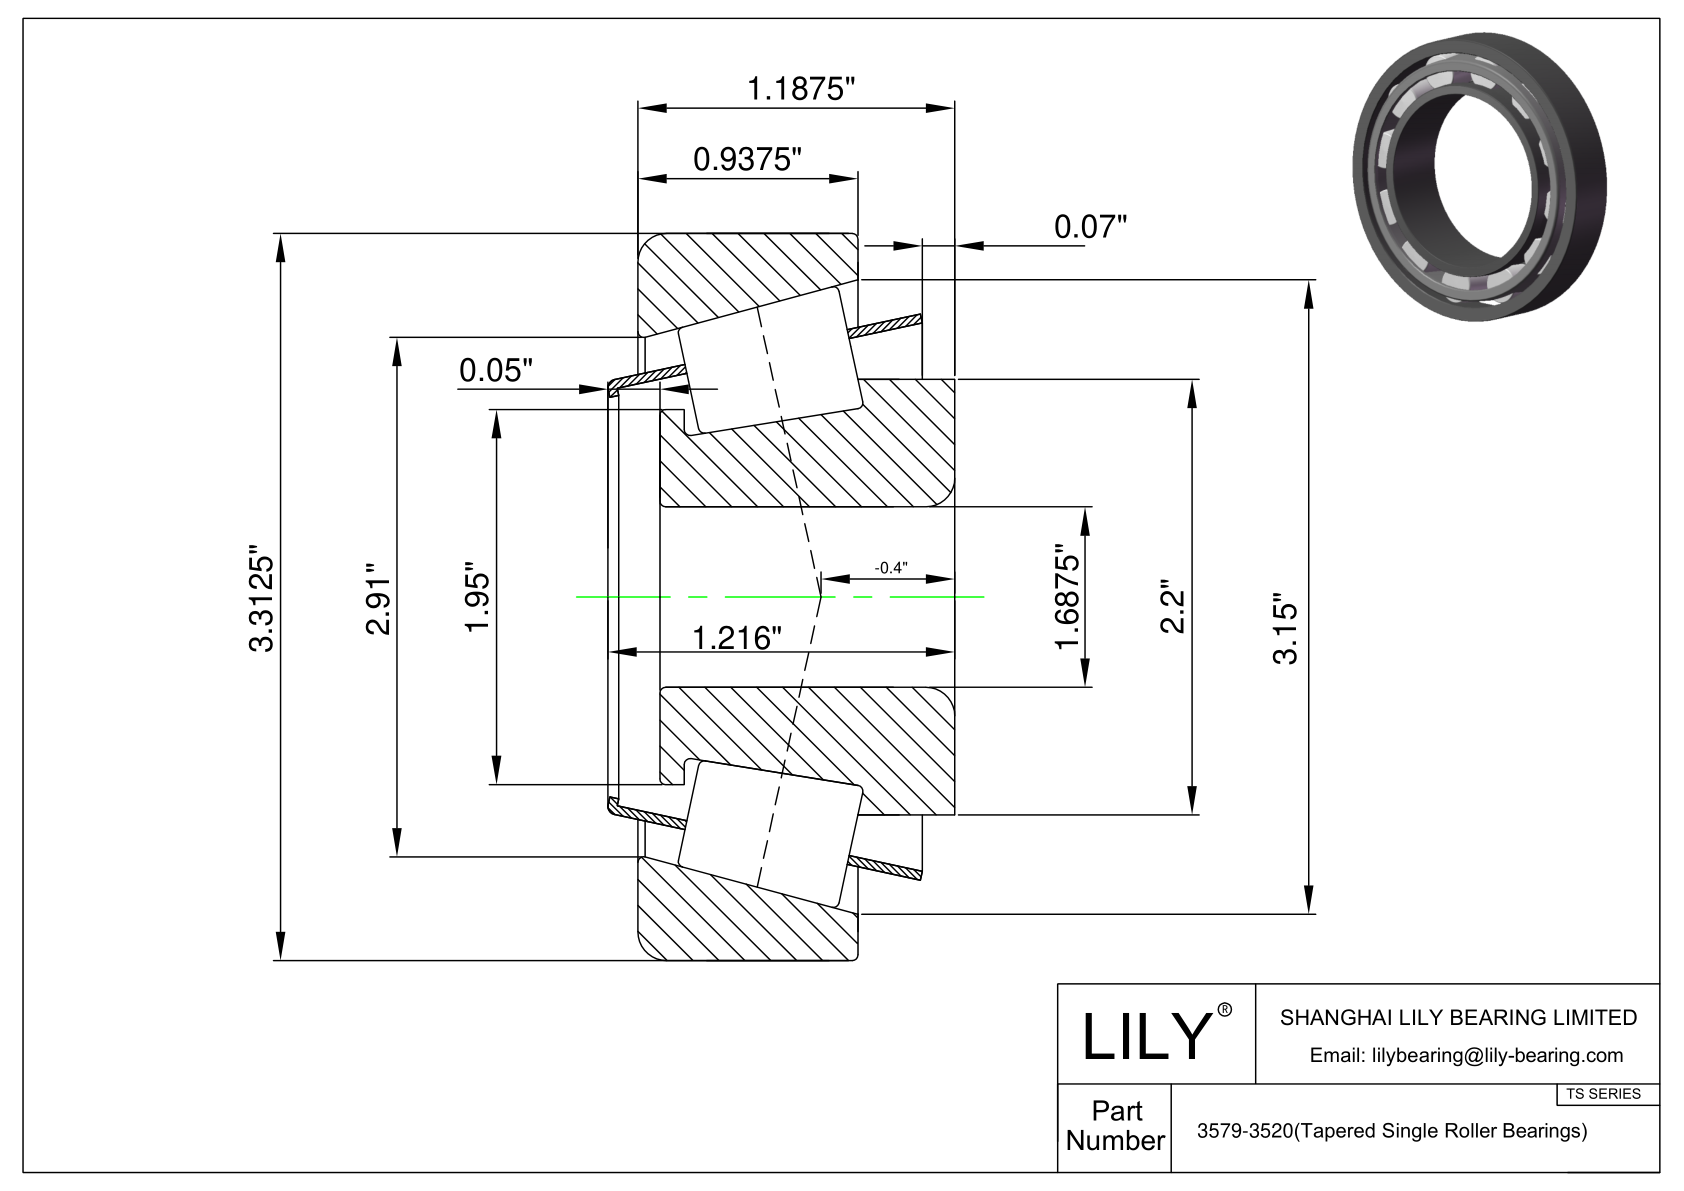 3579-3520 TS (Tapered Single Roller Bearings) (Imperial) cad drawing